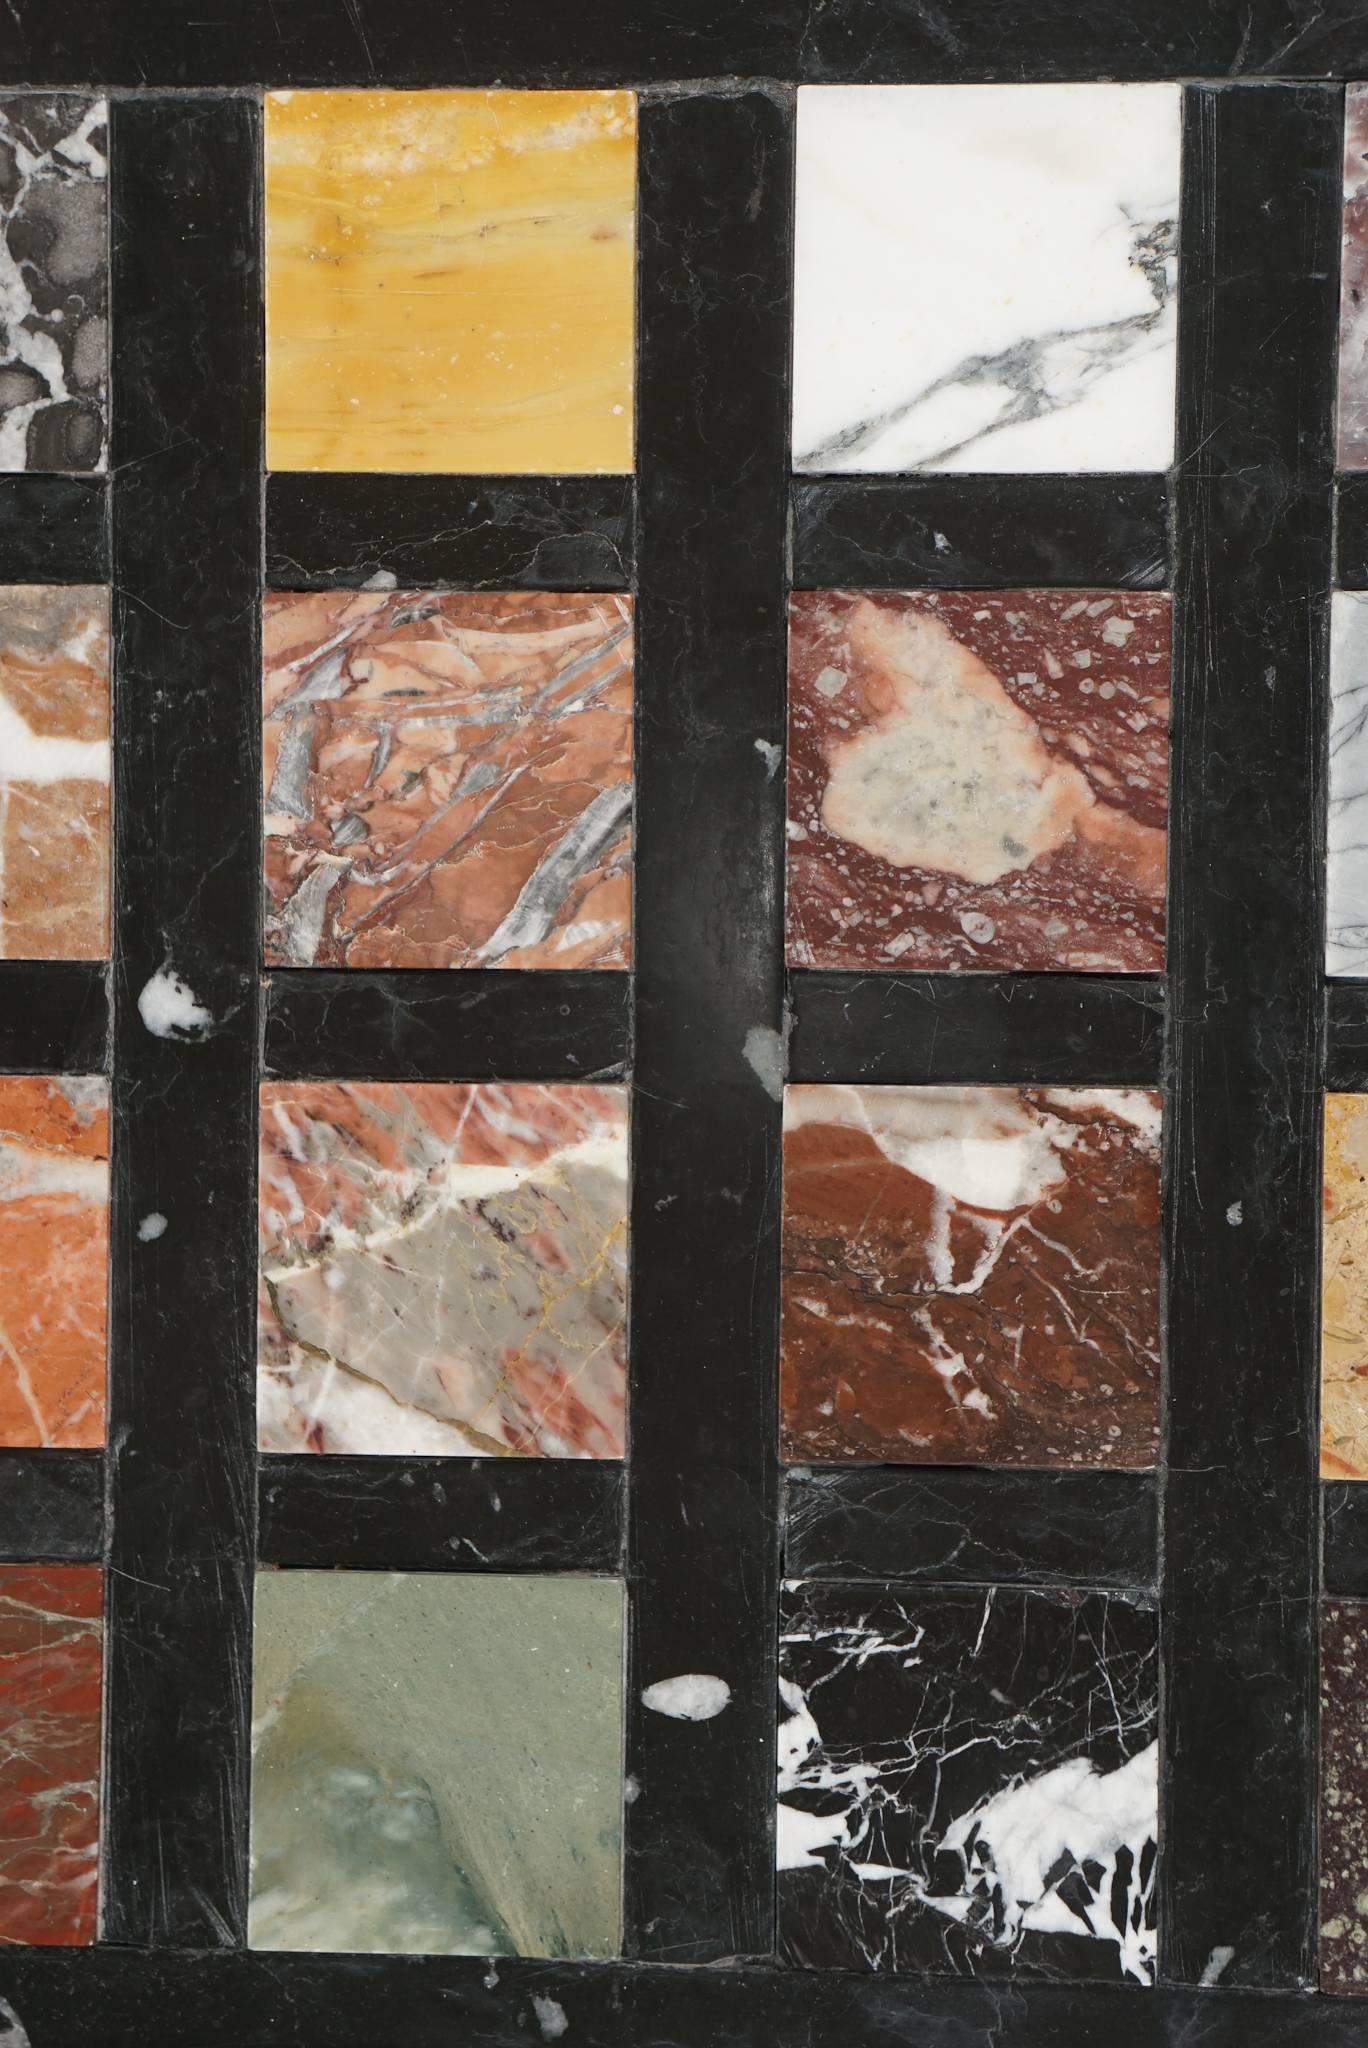 Italian Grand Tour marble specimen plaque in original silver-giltwood frame consisting of 20 different rare and ancient marbles, including Porphyry and Jasper, inlaid into a black and white onyx geometric grid.